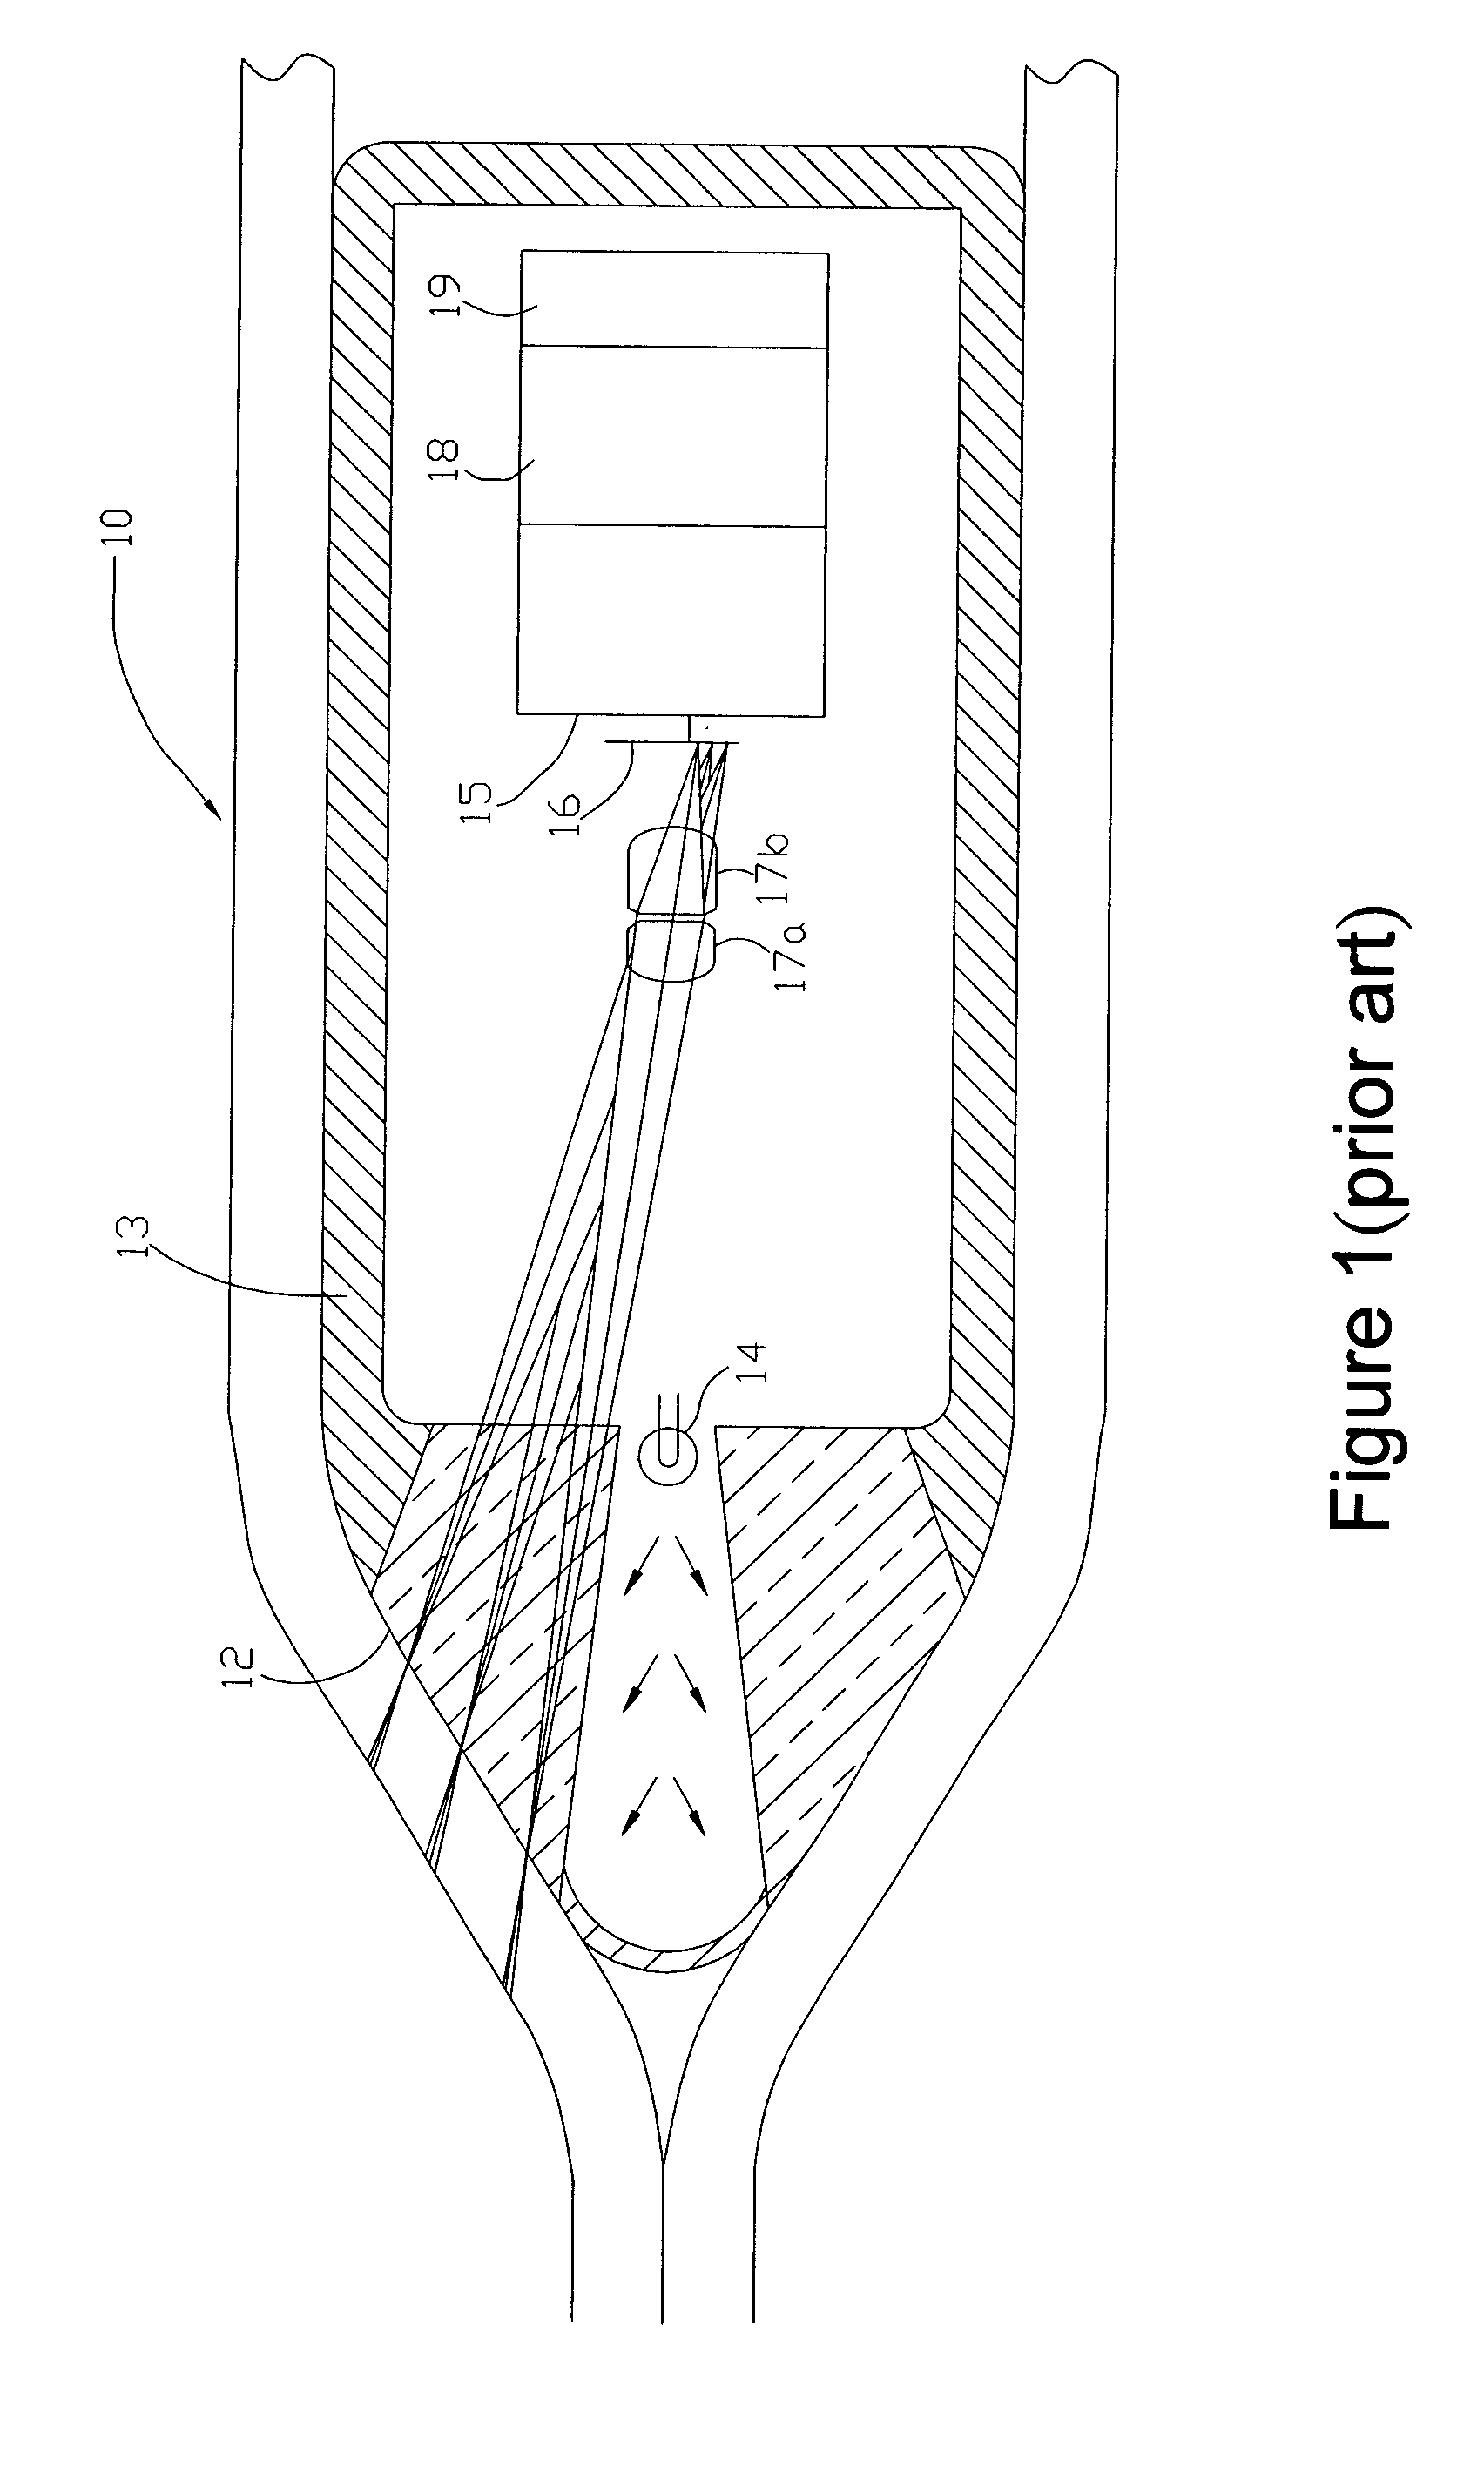 Memory-type two-section endoscopic system